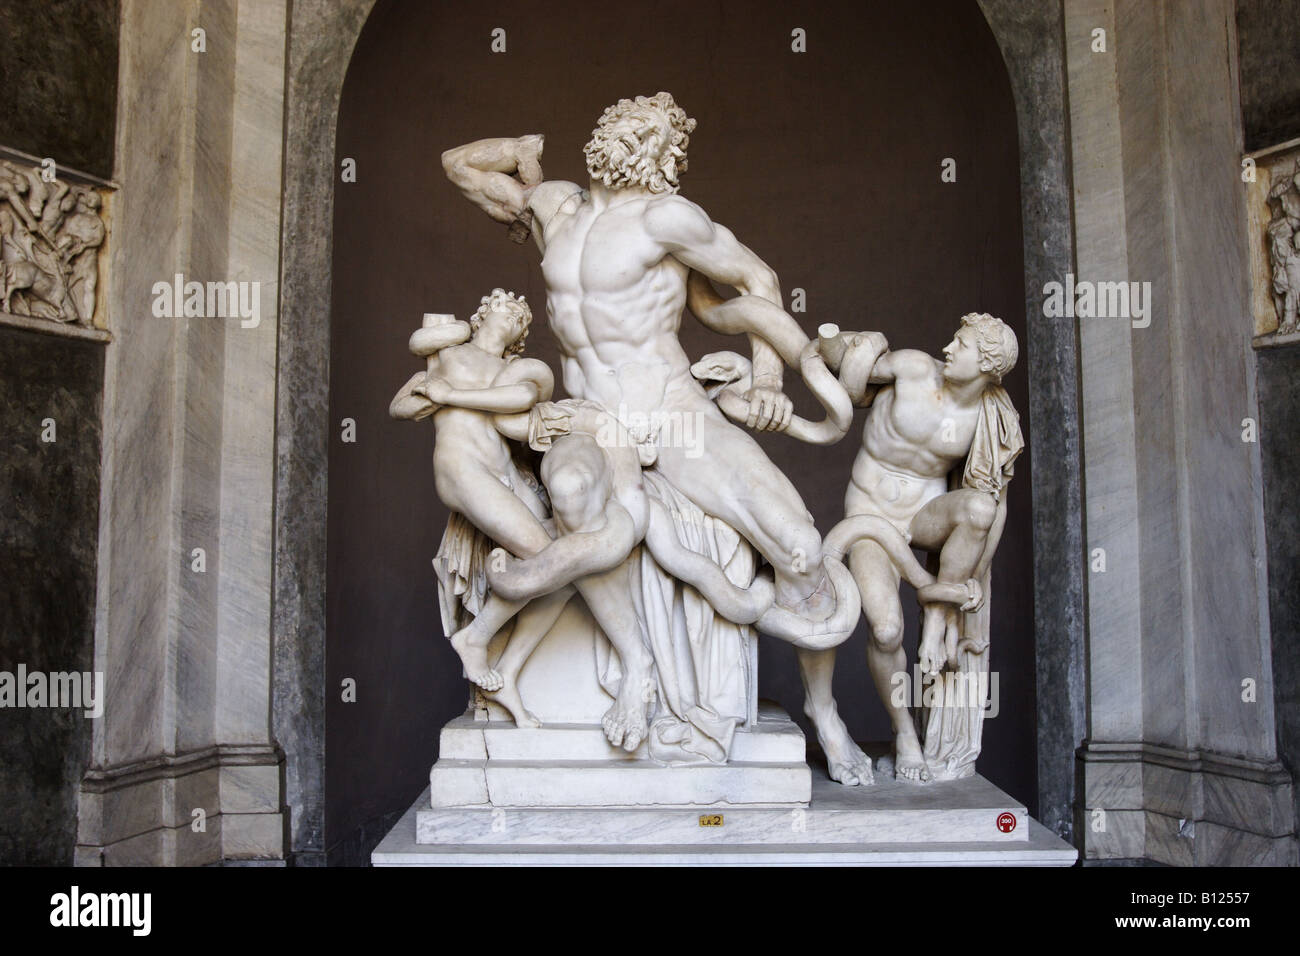 Sculpture of Laoconte and his sons by Gian Lorenzo Bernini in the Vatican museum, Rome Stock Photo